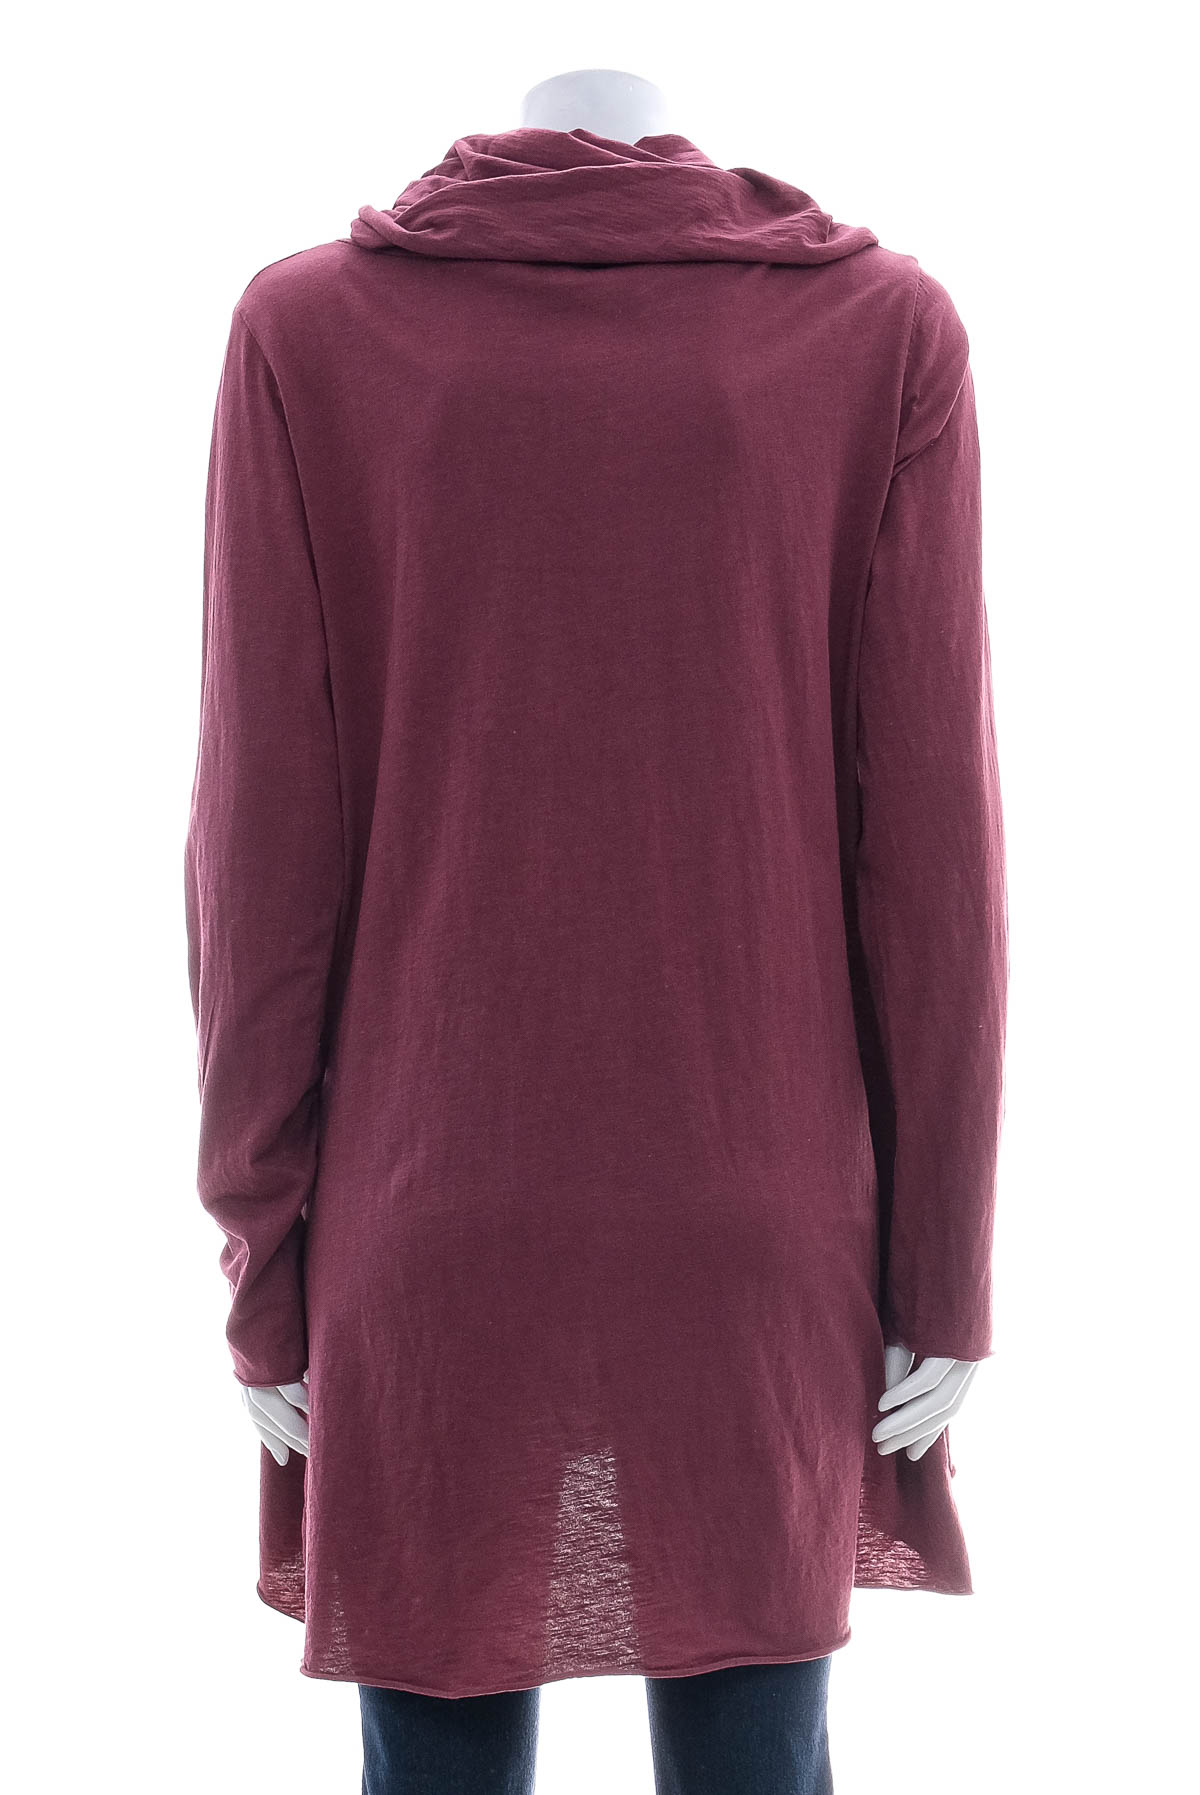 Women's tunic - Made in Italy - 1